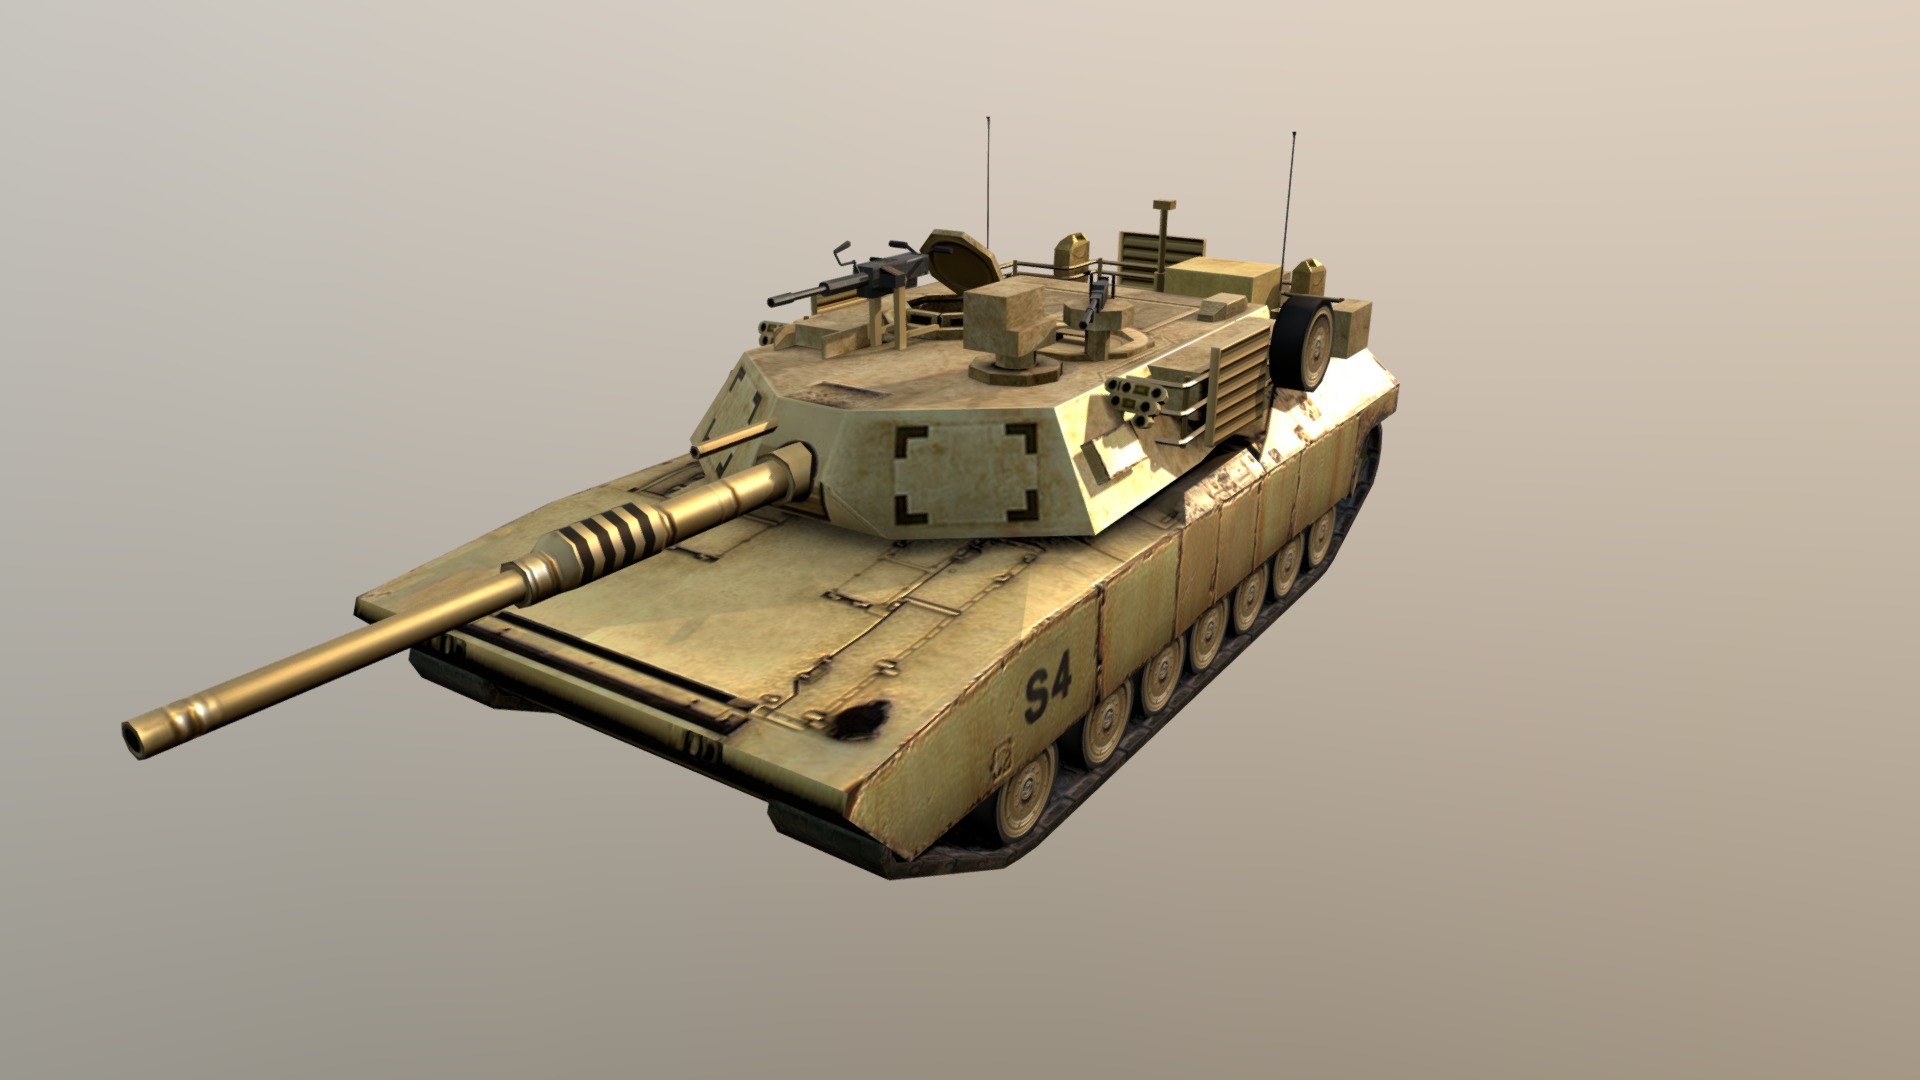 Tank - Low Poly Game Asset

contact me at aquibrazal@live.com for 3d Modeling, texturing &amp; animation 3d model